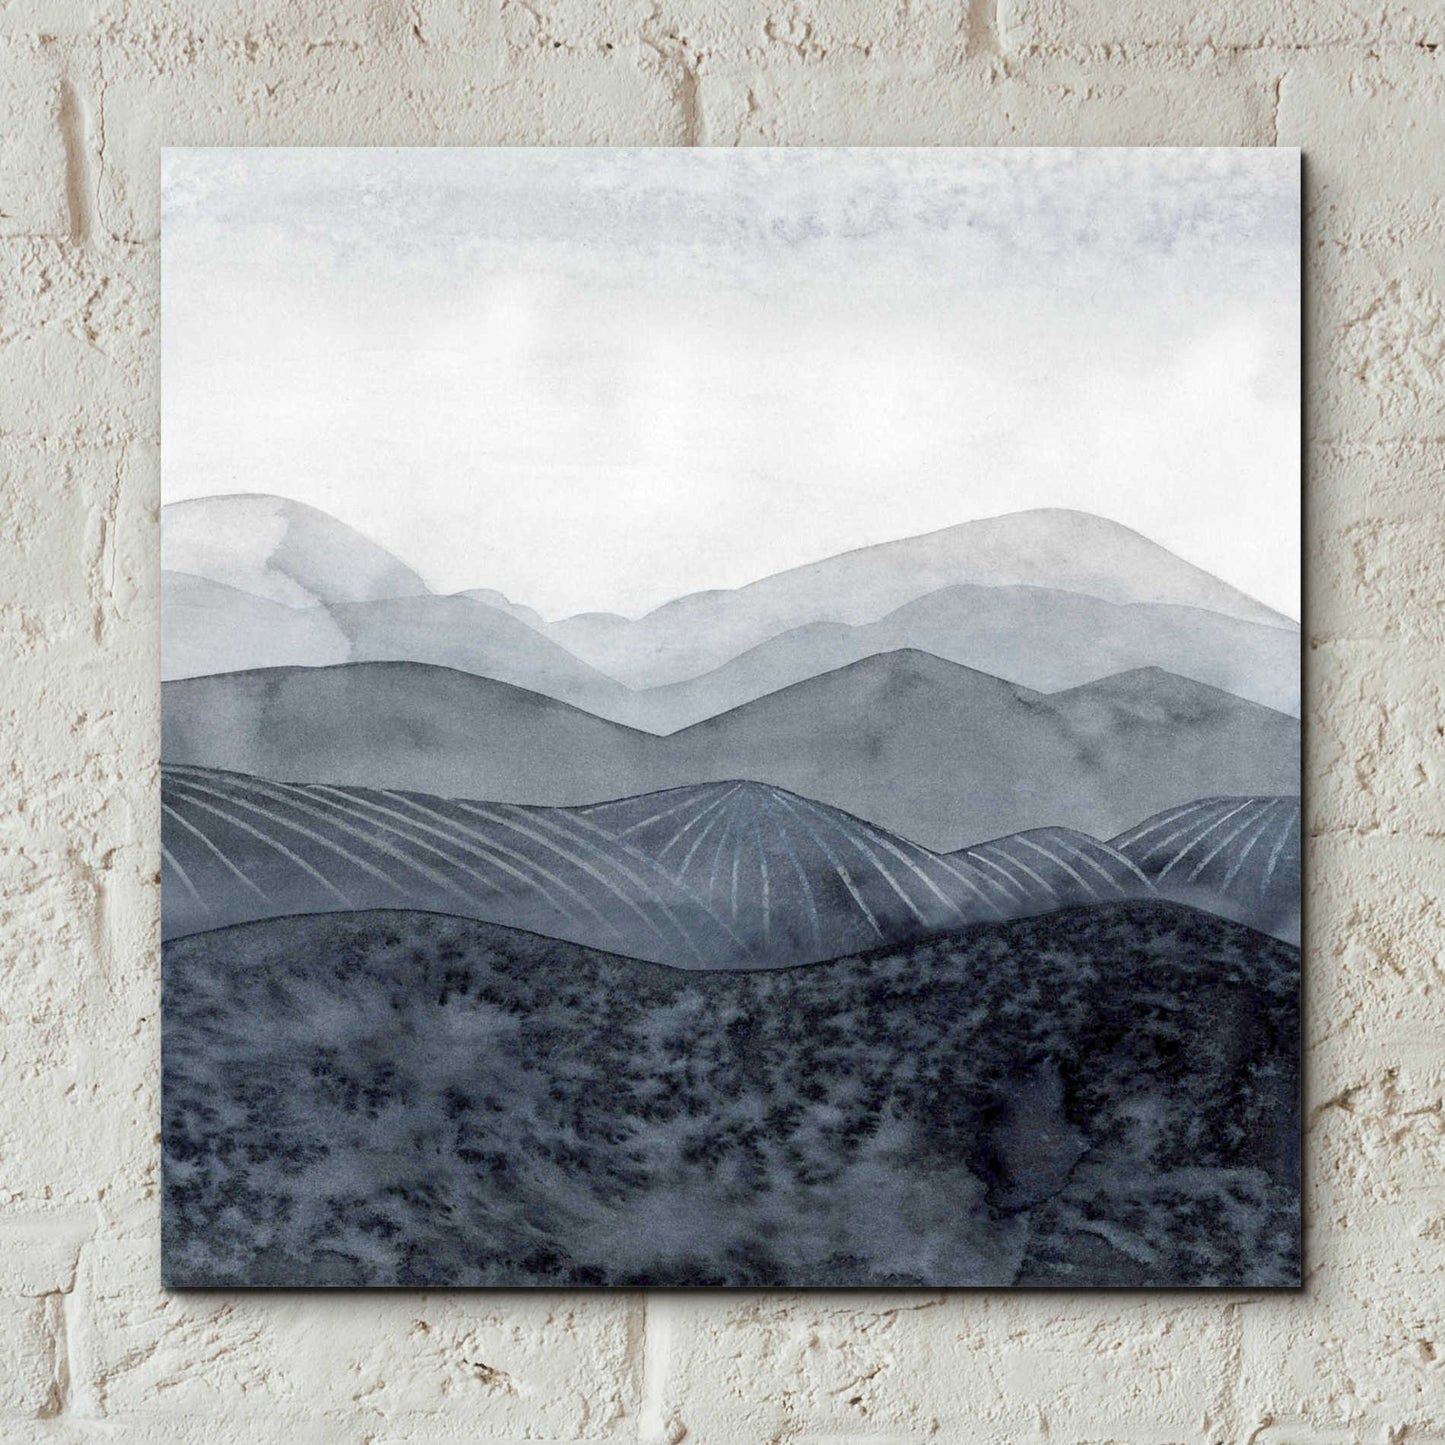 Epic Art 'Blustering Valley II' by Grace Popp, Acrylic Wall Glass,12x12